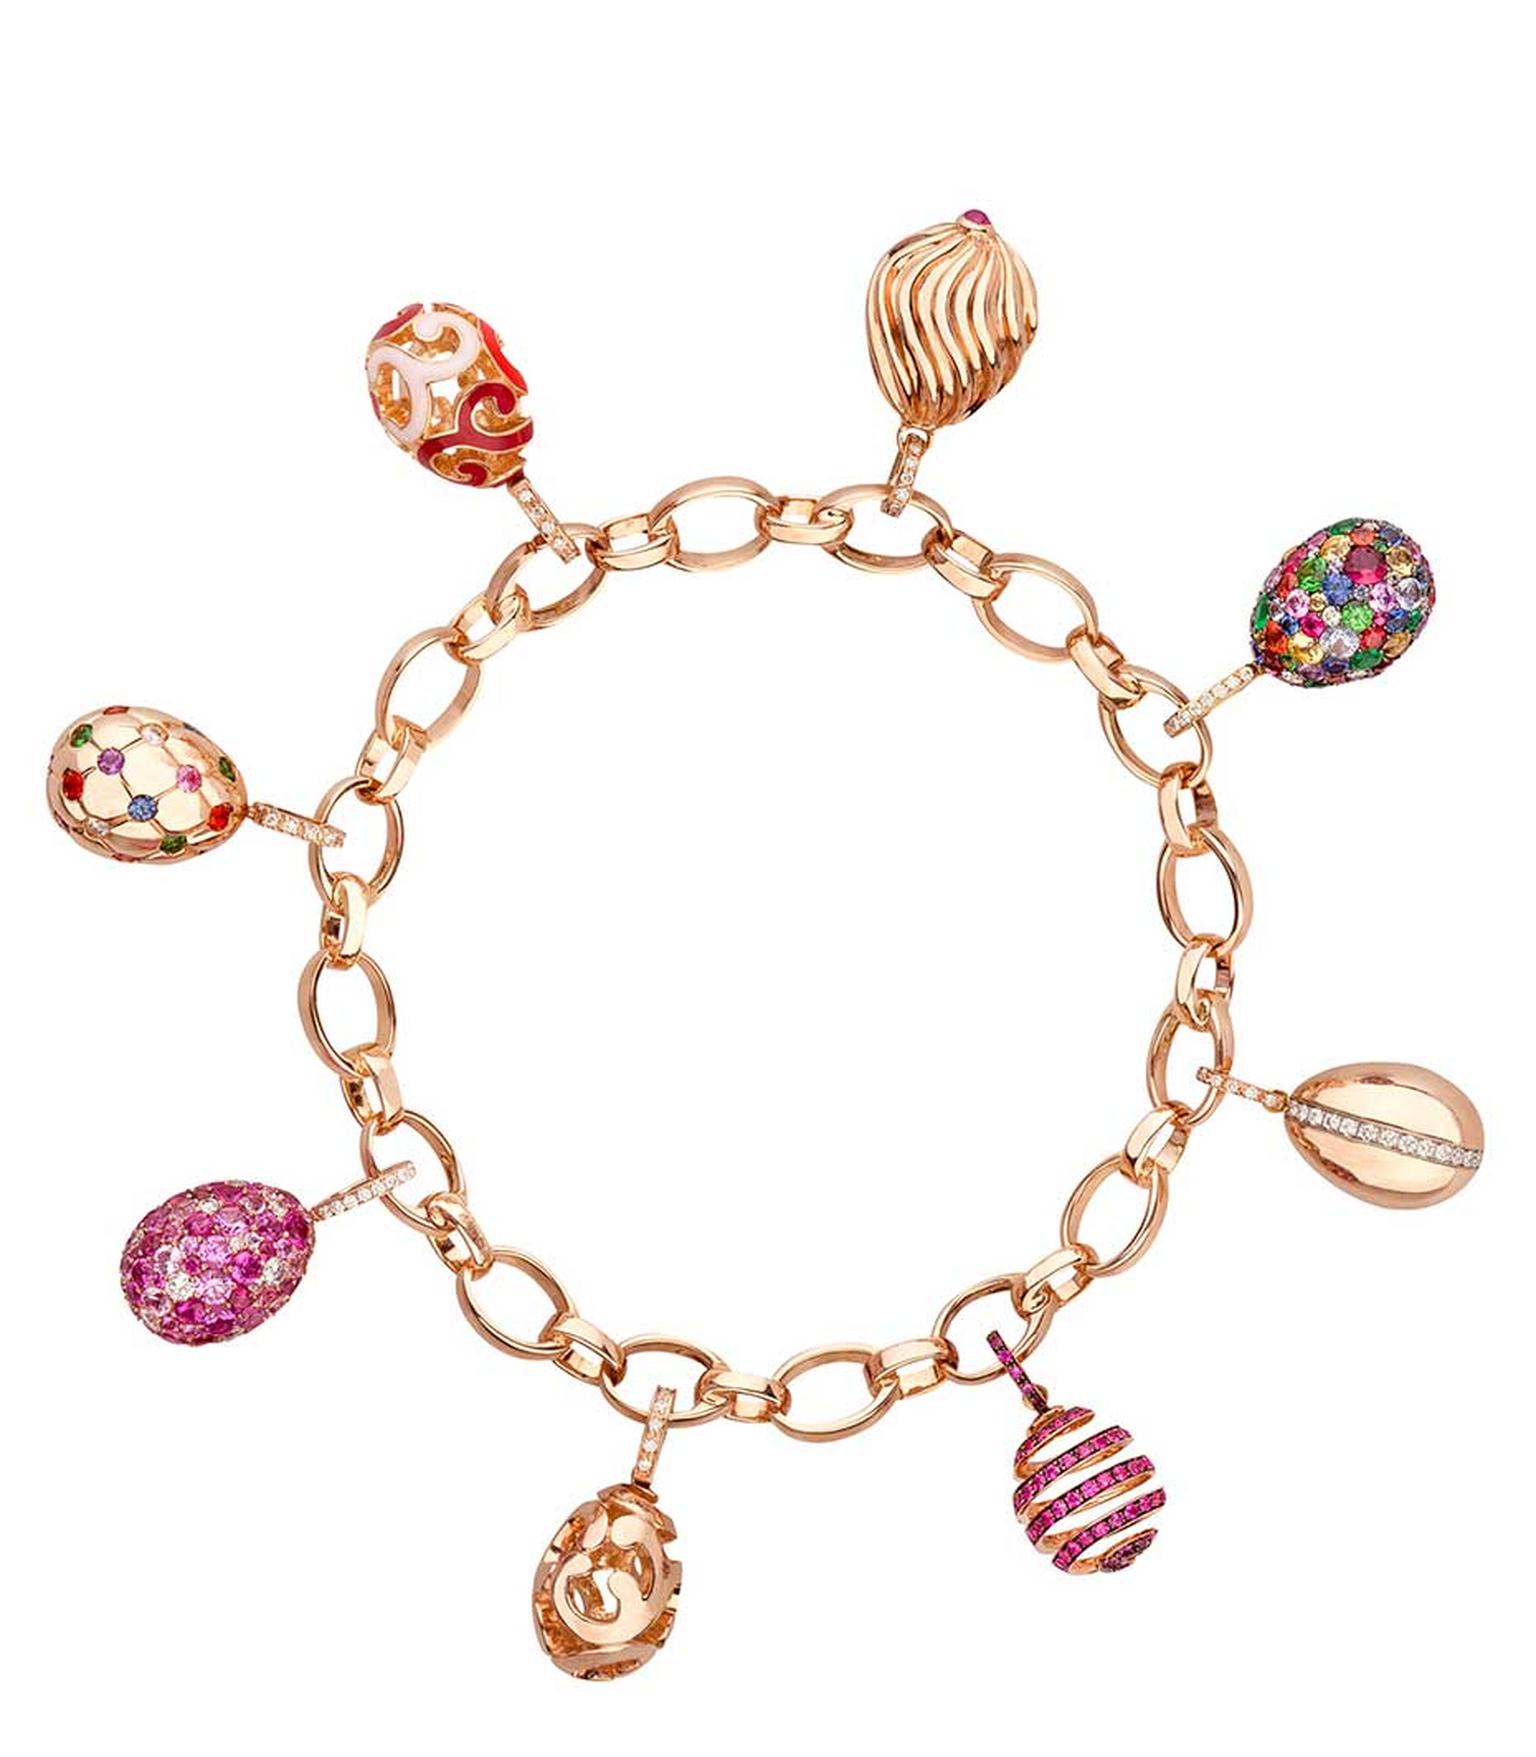 Rococo rose gold lacquered charm egg | Fabergé | The Jewellery Editor